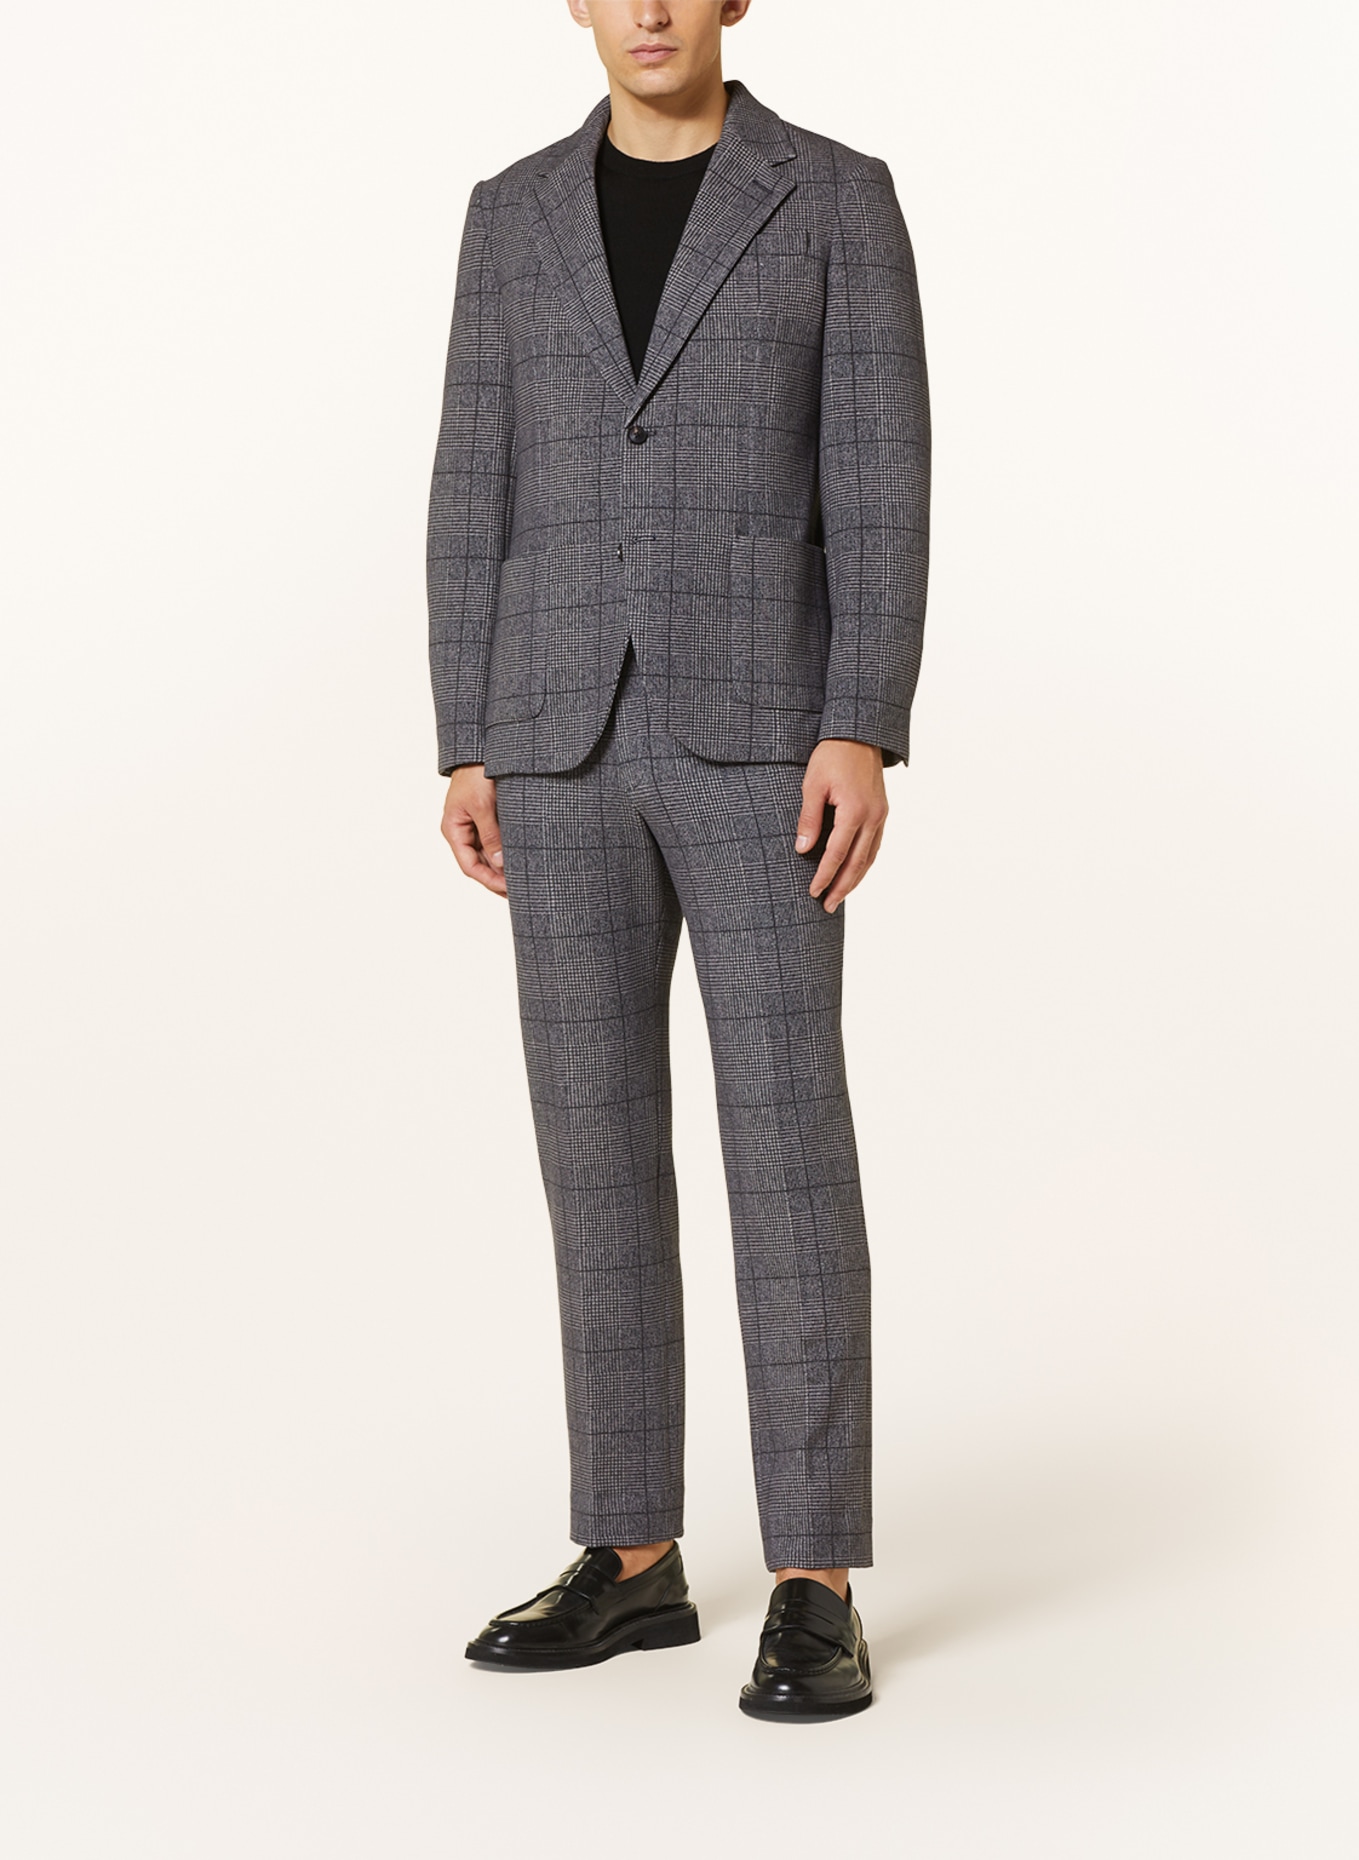 CIRCOLO 1901 Suit jacket extra slim fit made of jersey, Color: DARK BLUE/ LIGHT GRAY (Image 2)